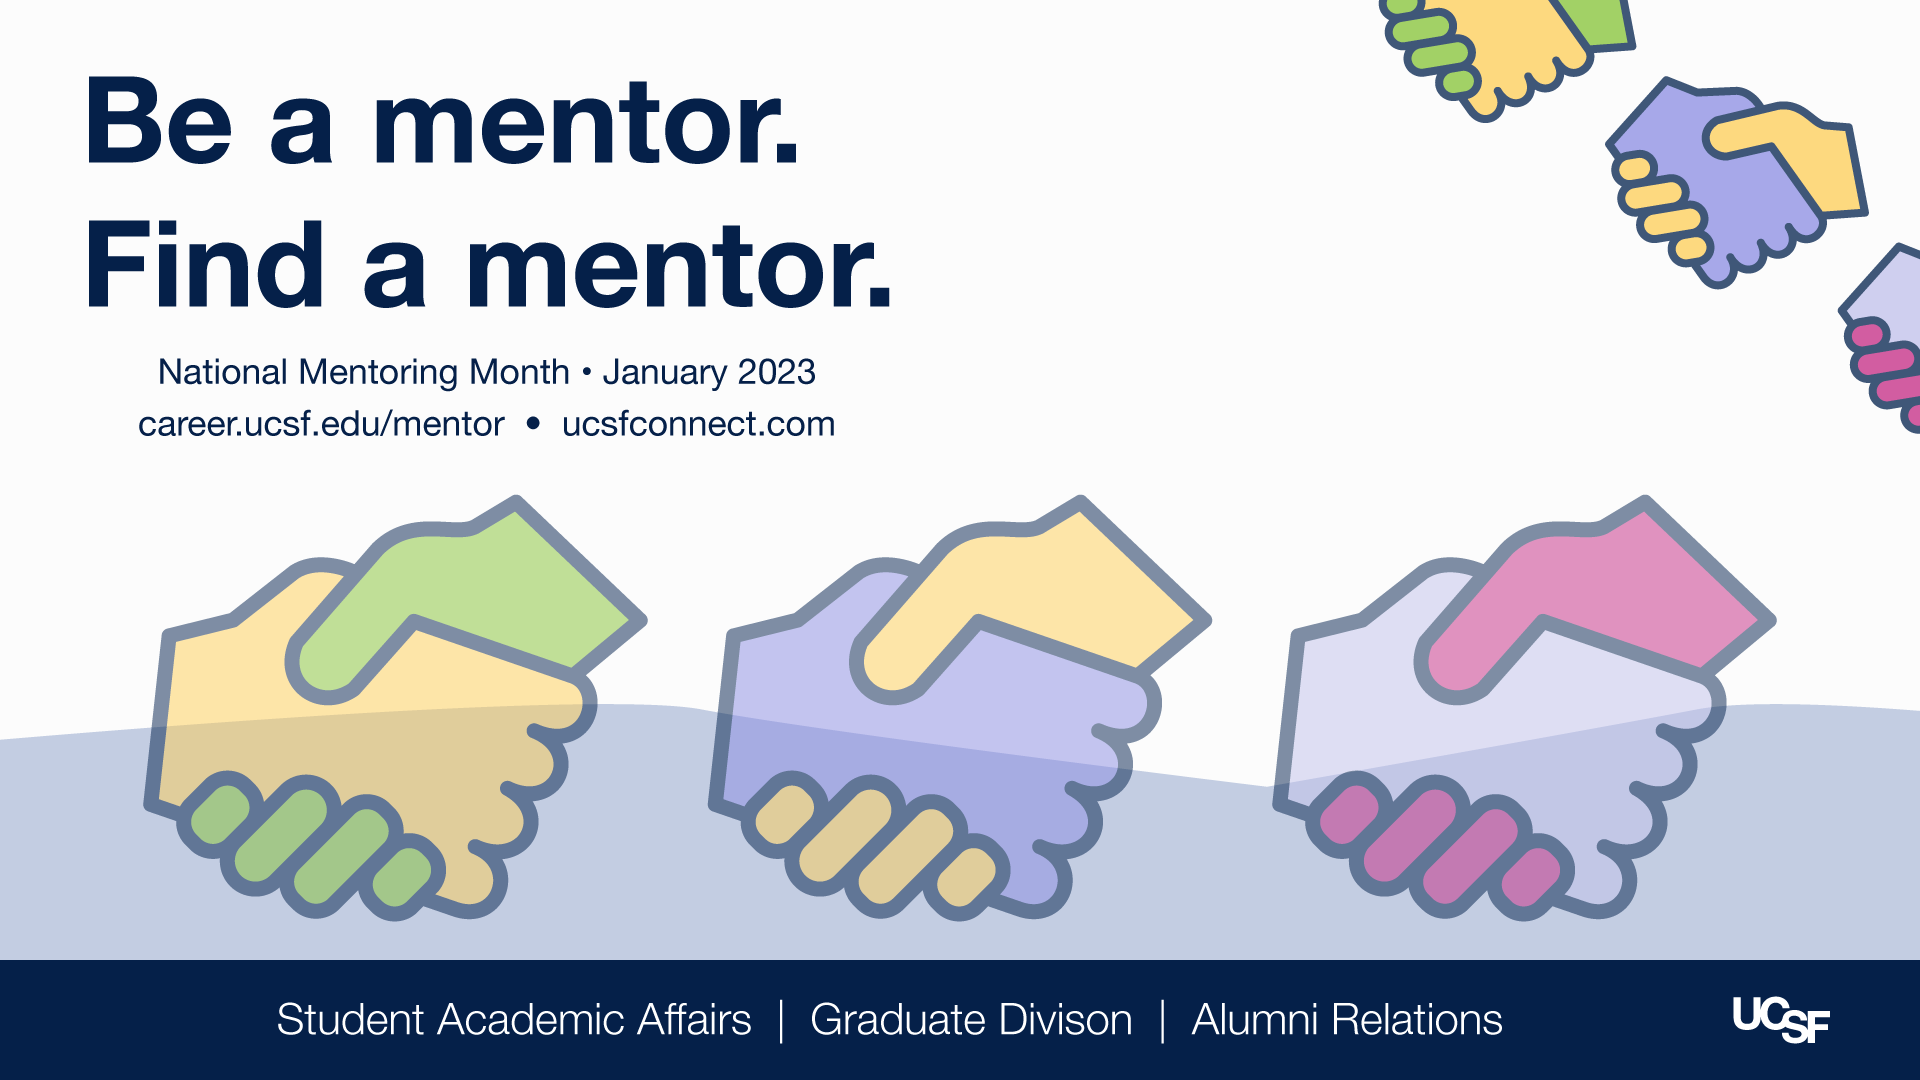 National Mentoring Month! Office of Career and Professional Development